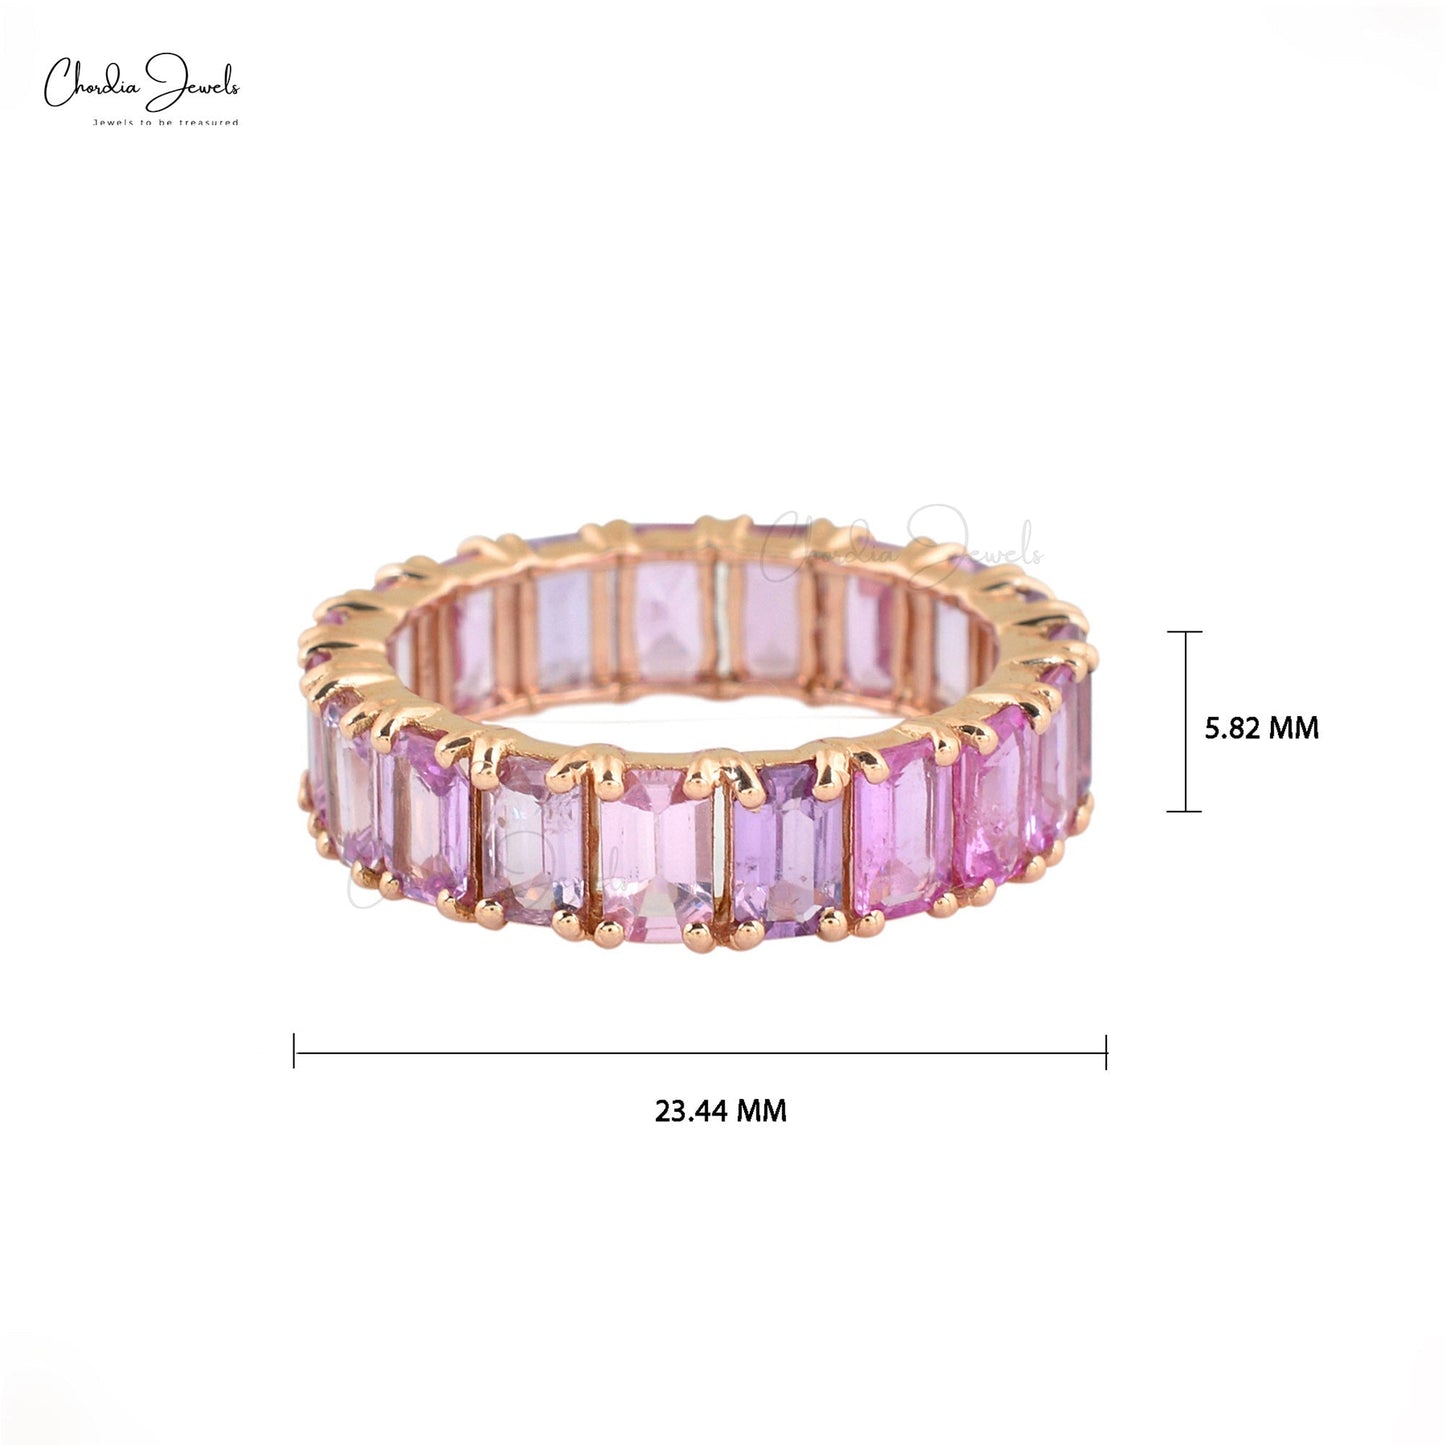 14k Solid Rose Gold Anniversary Ring For Women, 5x3mm Octagon Cut Pink Sapphire Ring Band For Her, September Birthstone Eternity Band Ring, 7.22 Carat Natural Gemstone Ring